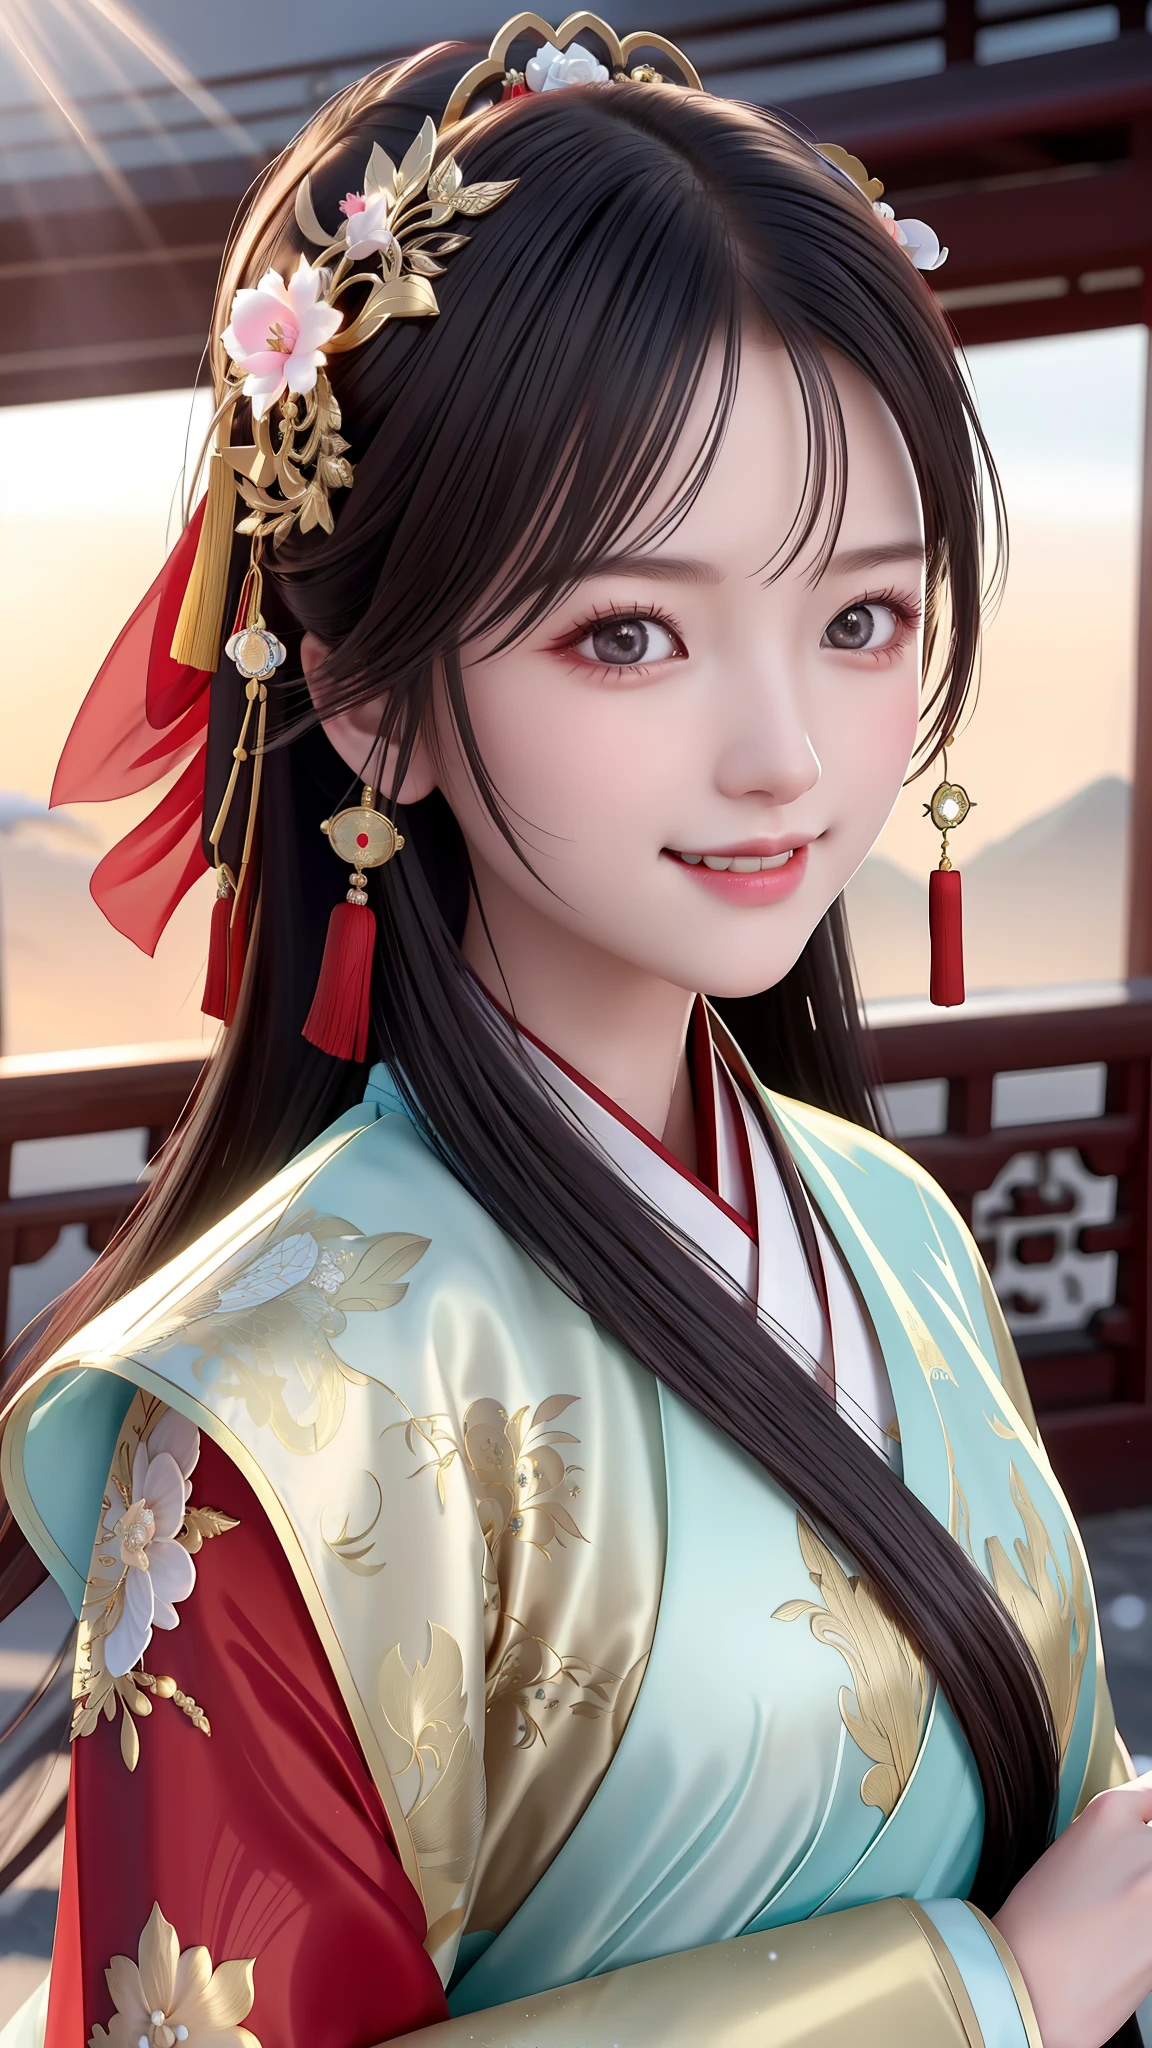 High resolution, 1girl, (glamorous smile: 0.8), Chinese Hanfu, red Hanfu, hair accessories, snow, beauty, ultra-high-definition pictures, complex and detailed light, shadow and refraction, exquisite and high-quality atmospheric lighting, Octane rendering engine, focus Clear, high contrast, high resolution, cinematic concept photography